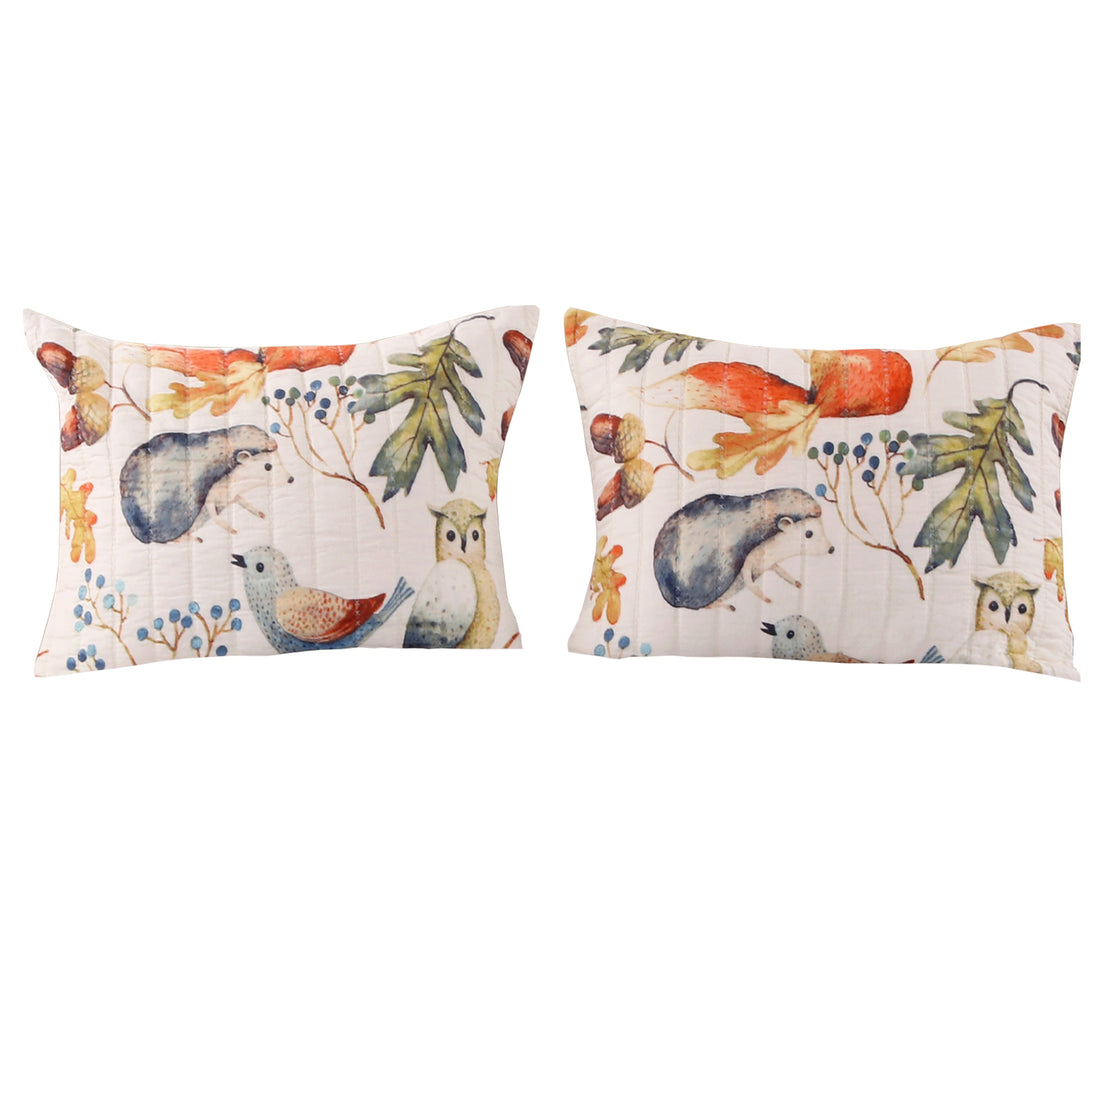 26 x 20 Inches Standard Pillow Sham with Fox and